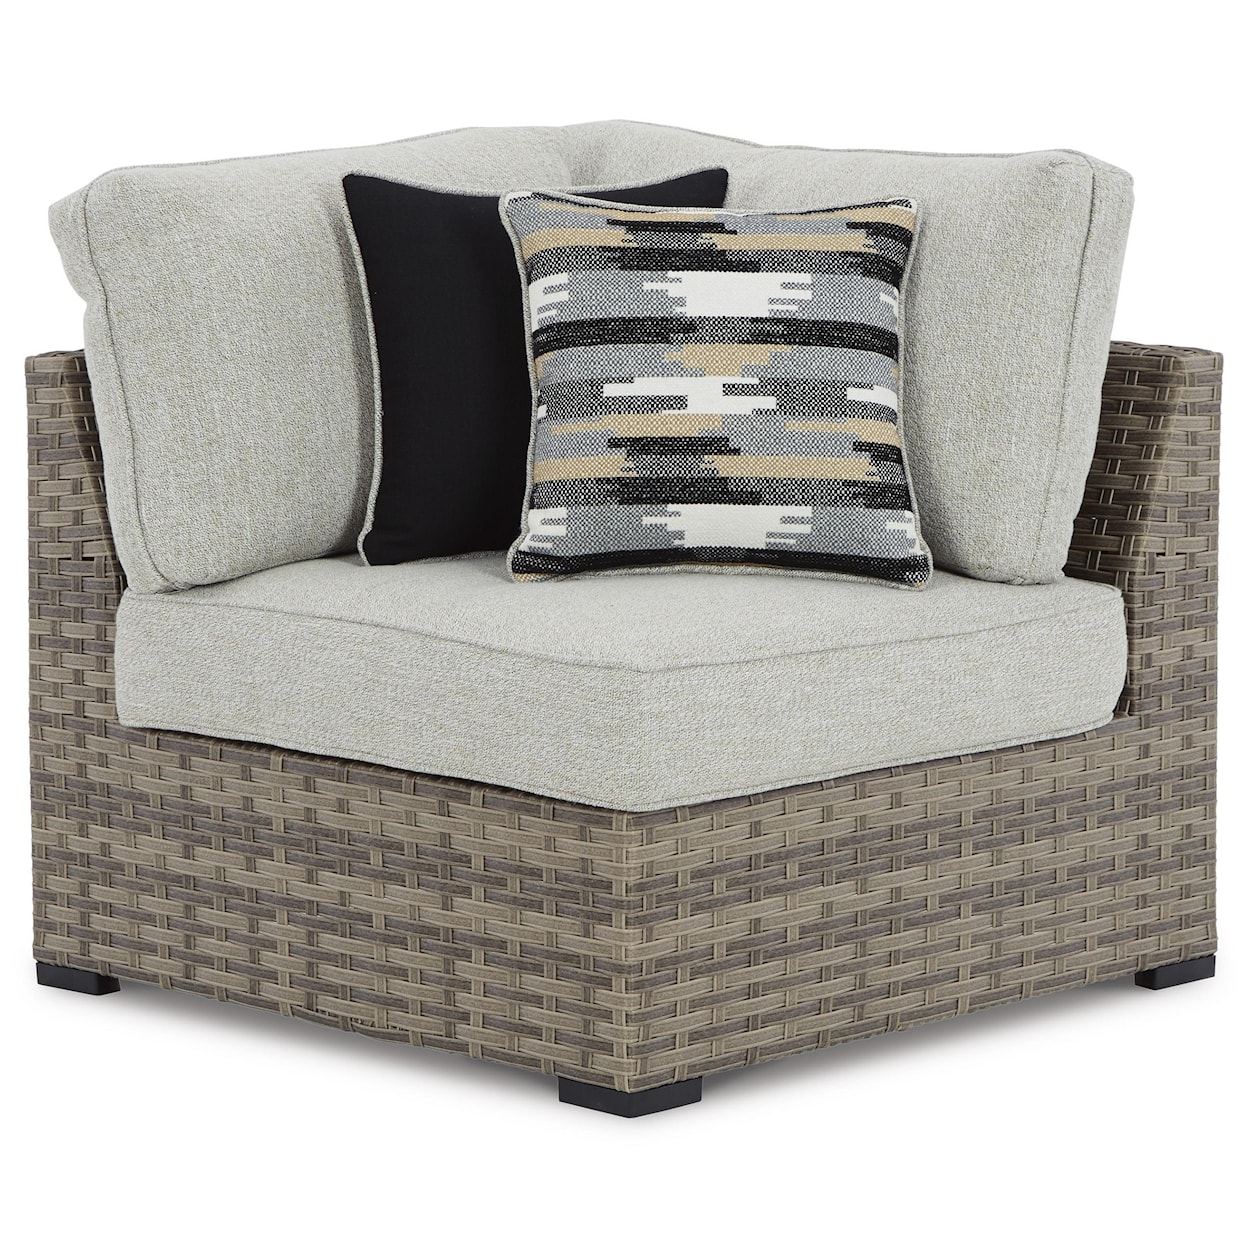 Signature Design by Ashley Calworth Outdoor Corner with Cushion